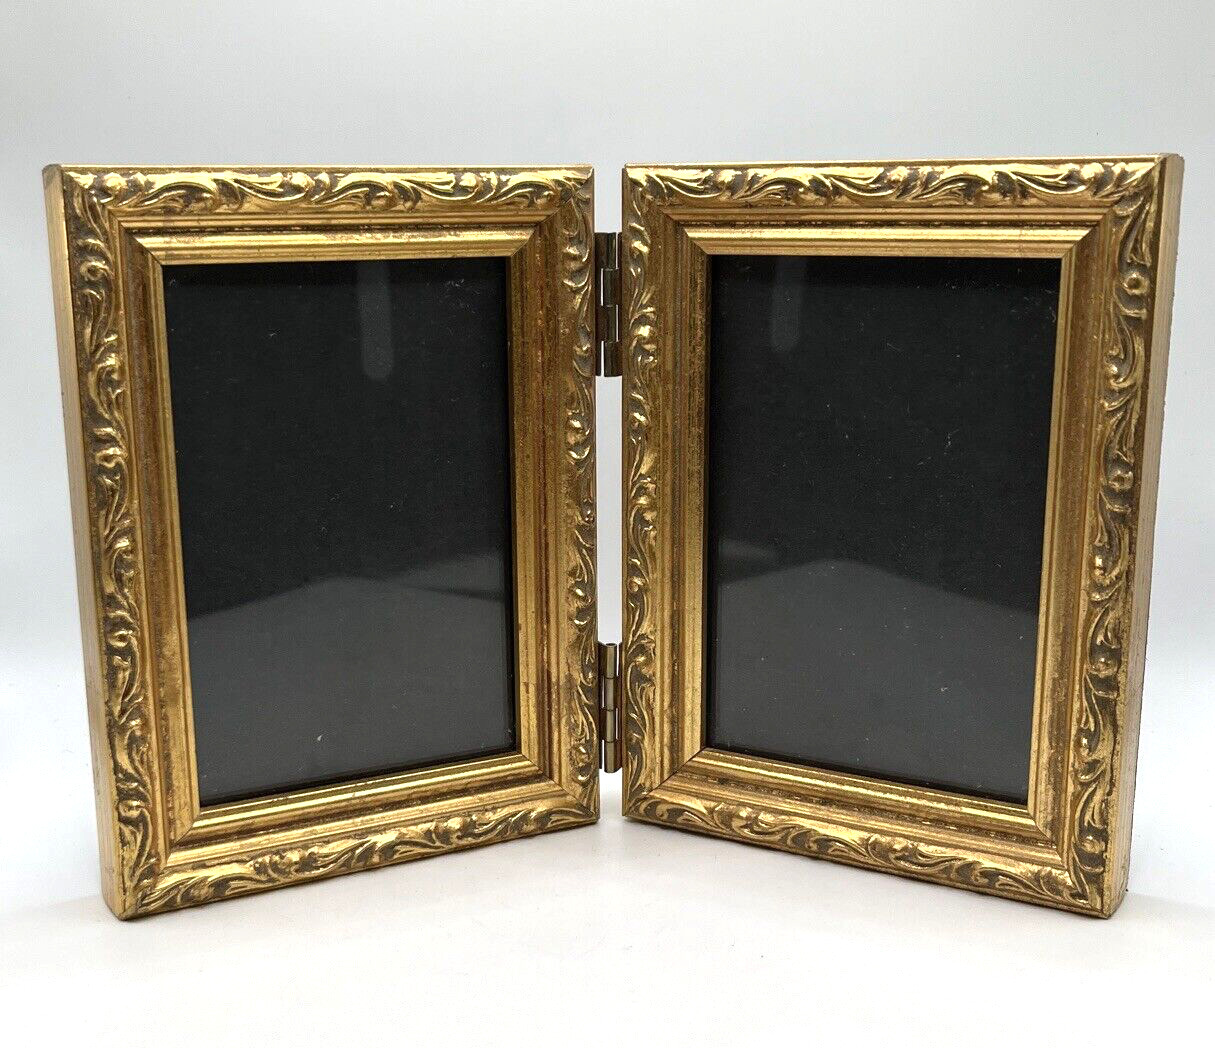 Vintage Golden Antique Style Ornate Double Picture Frame, 3.5x5 in Photo